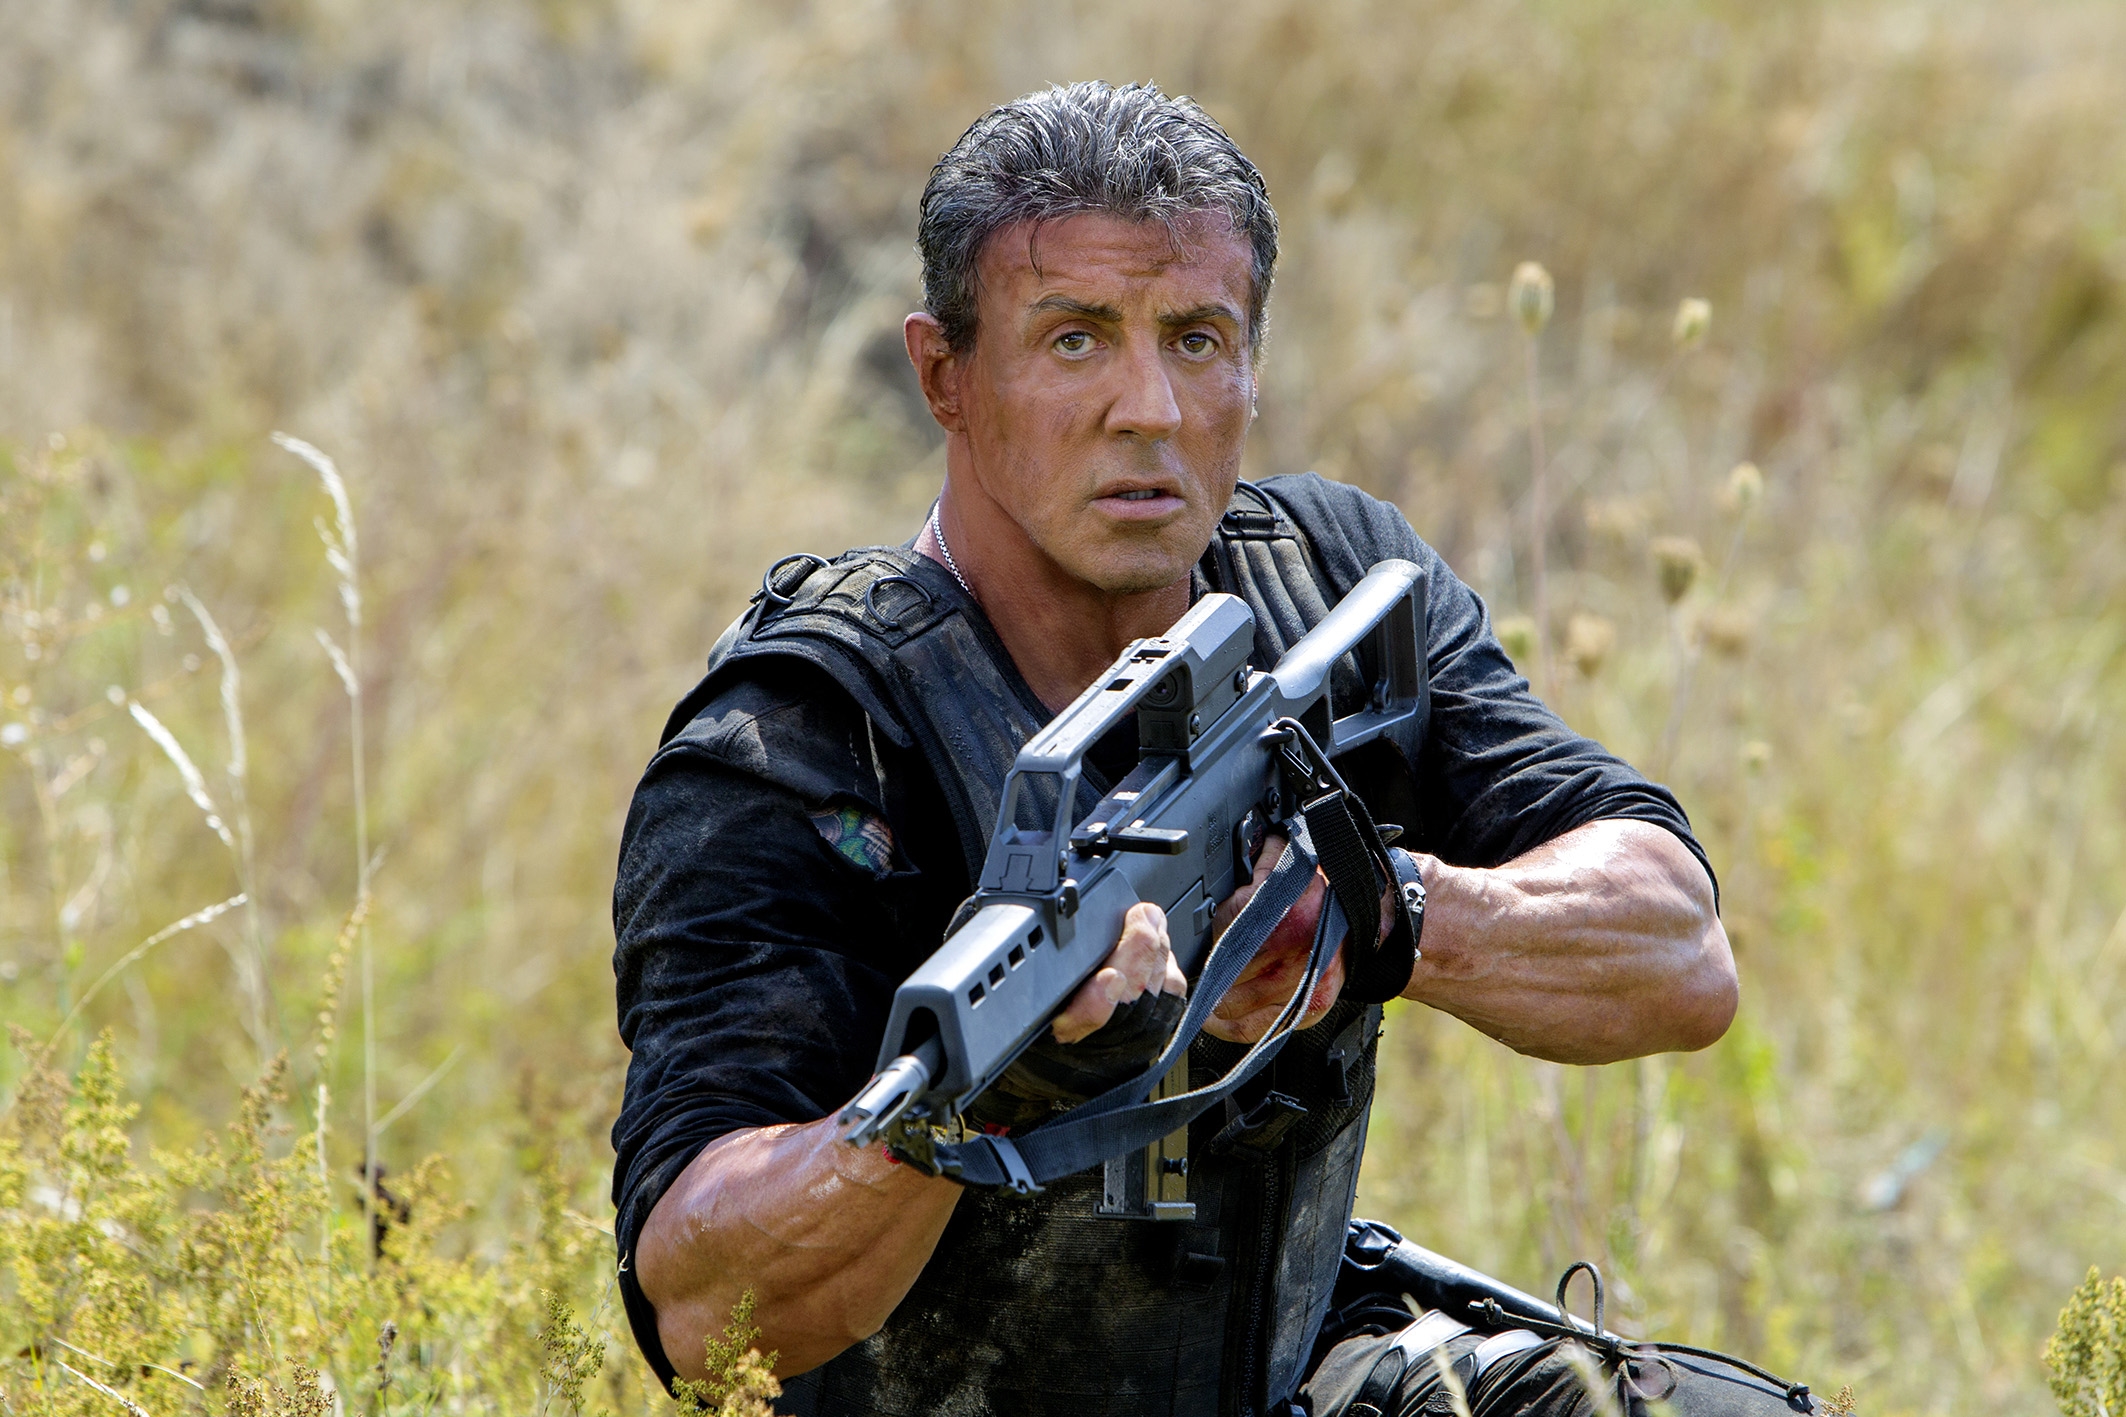 Image du film Expendables 3 29b688f2-aa53-47ed-be1a-48f77d561fea